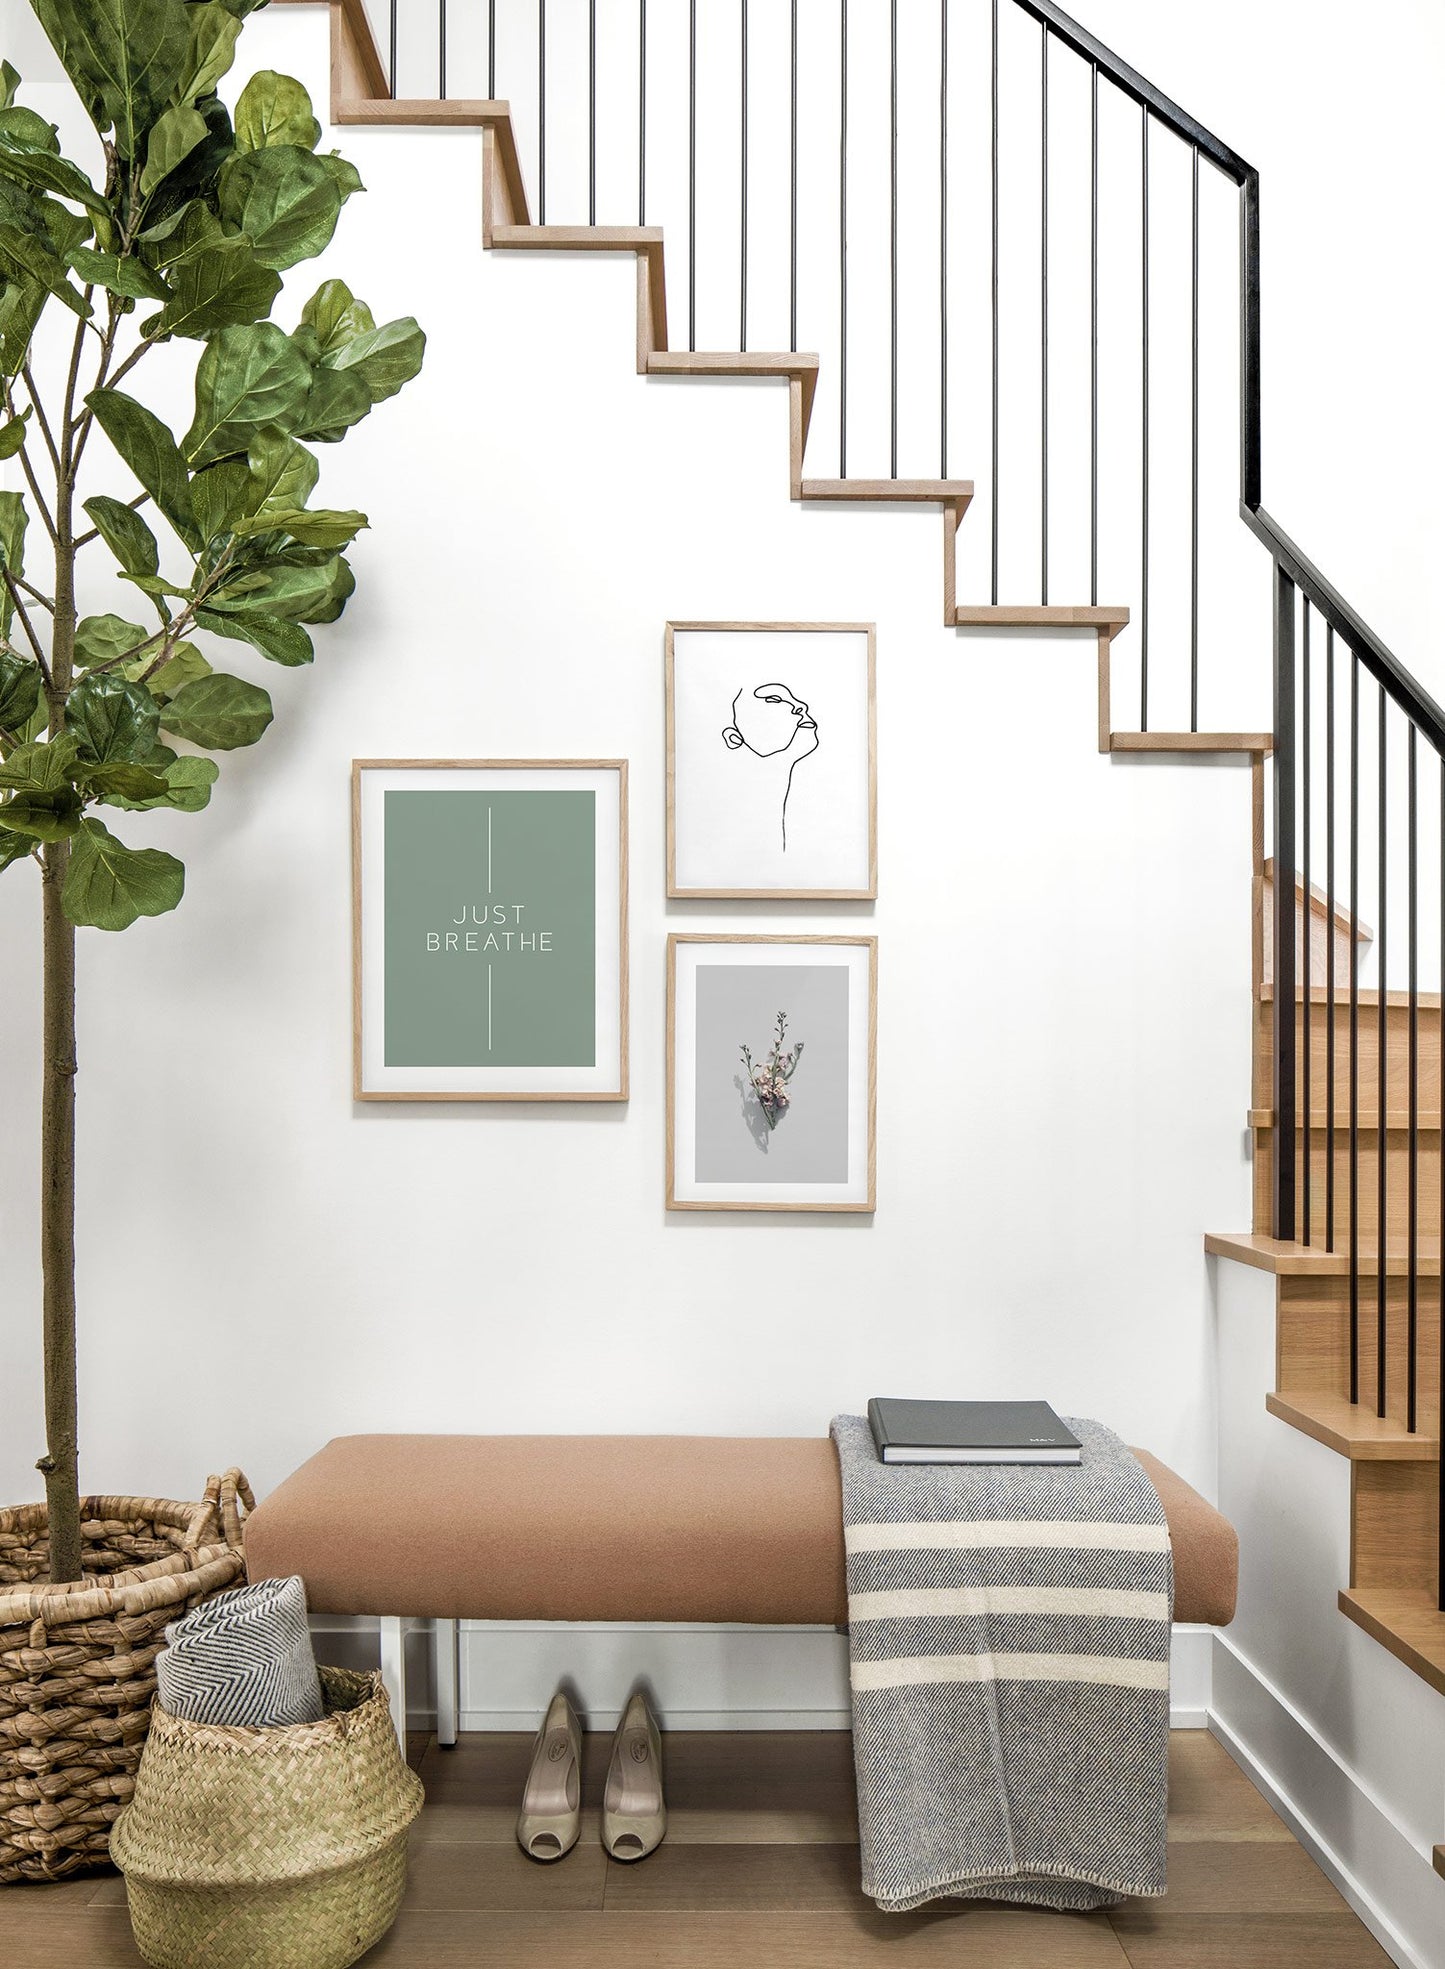 Modern minimalist typography poster by Opposite Wall with Just Breathe quote in green - Lifestyle Trio - Entryway